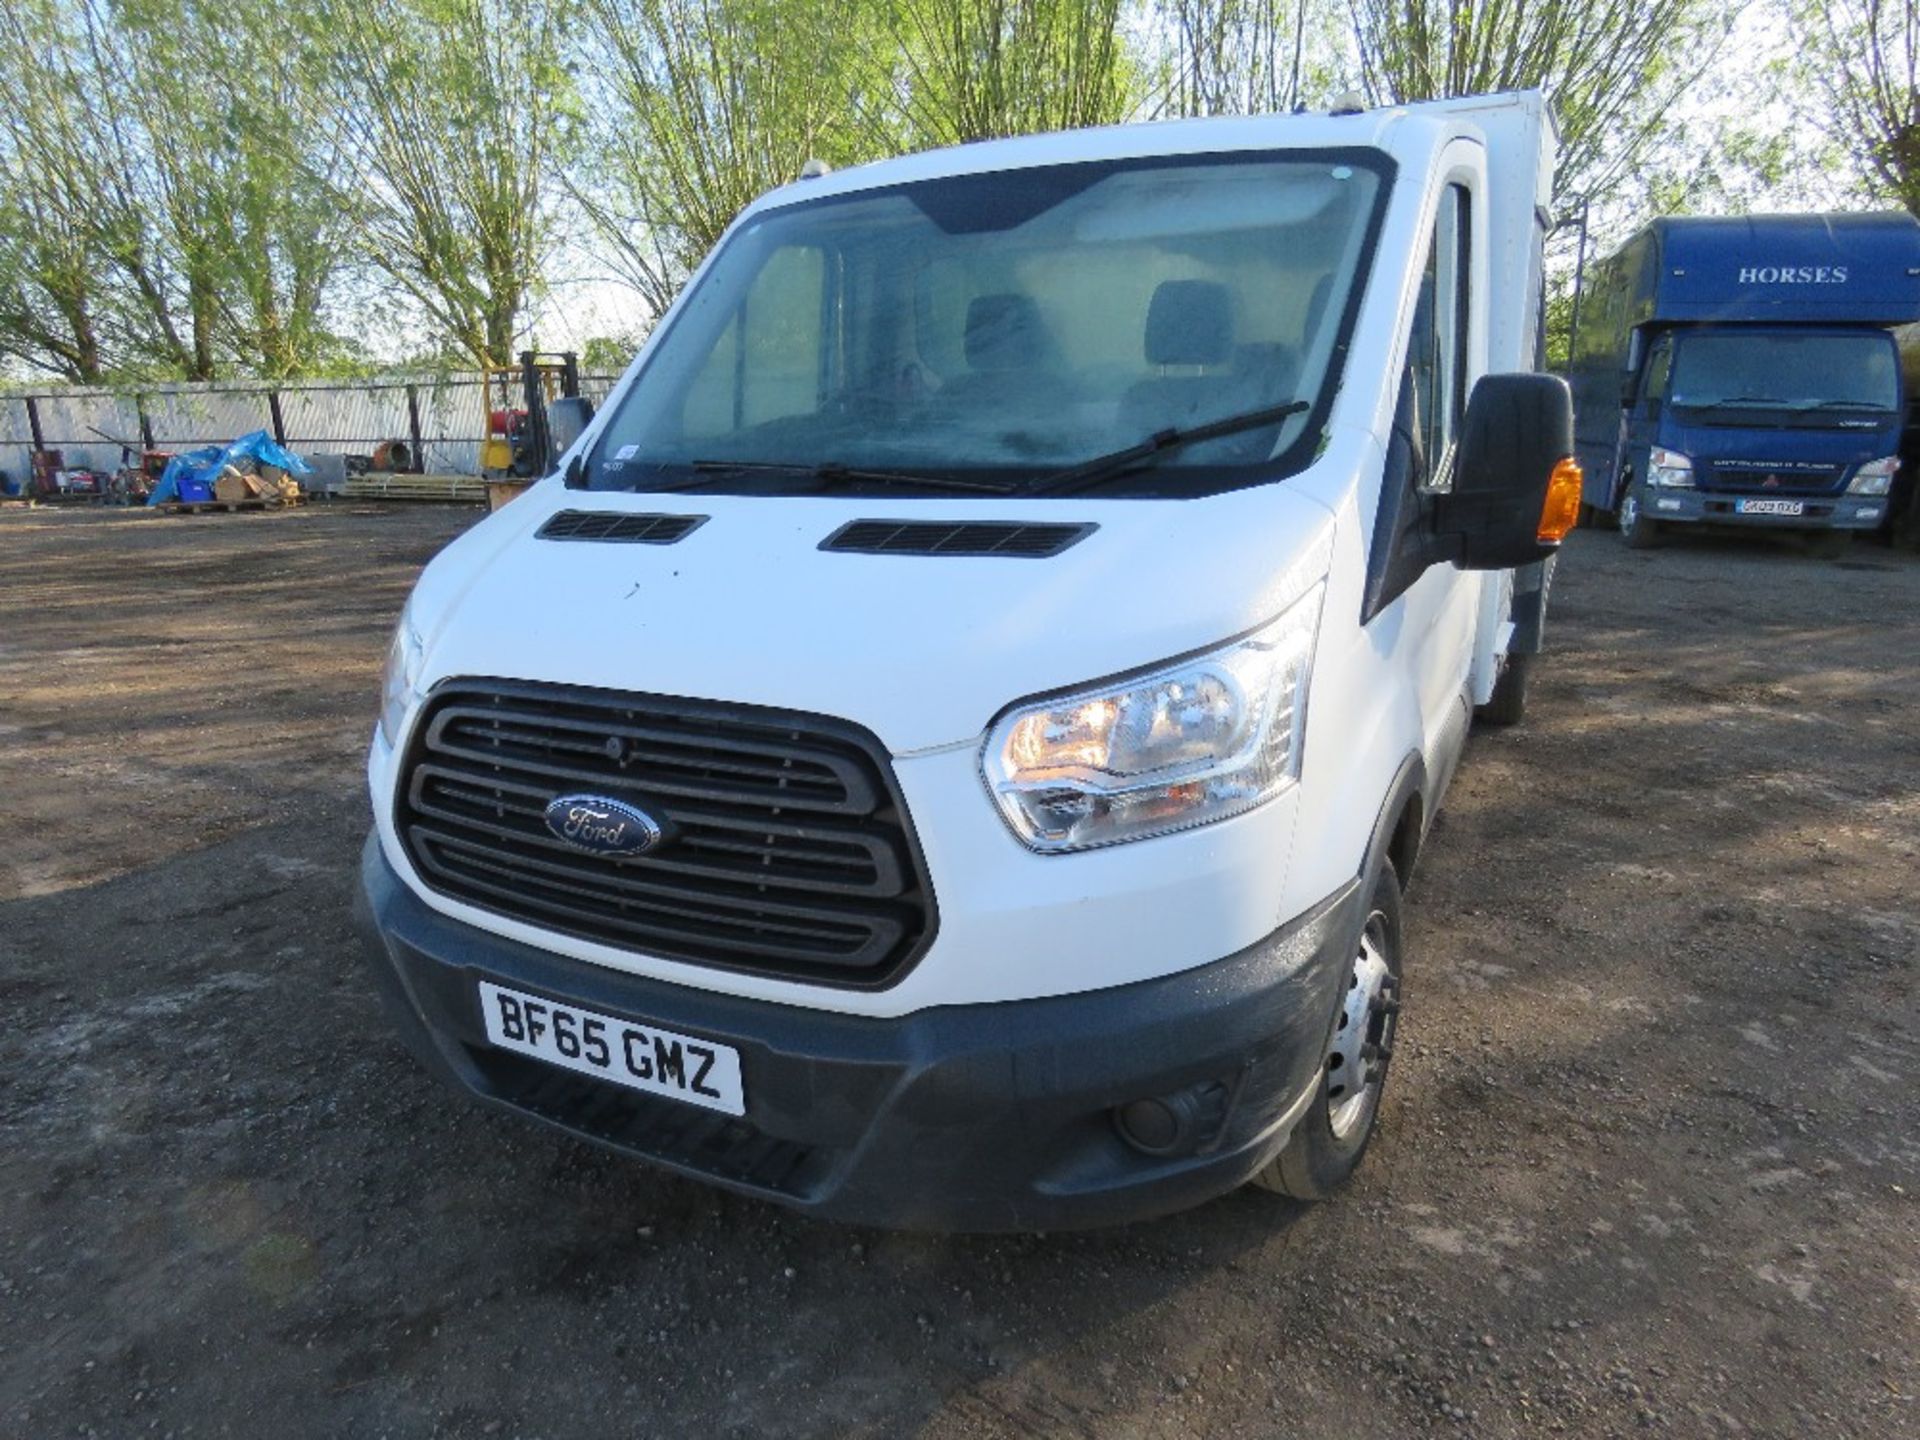 FORD TRANSIT TIPPER TRUCK WITH TOOL STORAGE LOCKER REG:BF65 GMZ. WITH V5 AND MOT UNTIL15.04.25. FIRS - Image 3 of 17